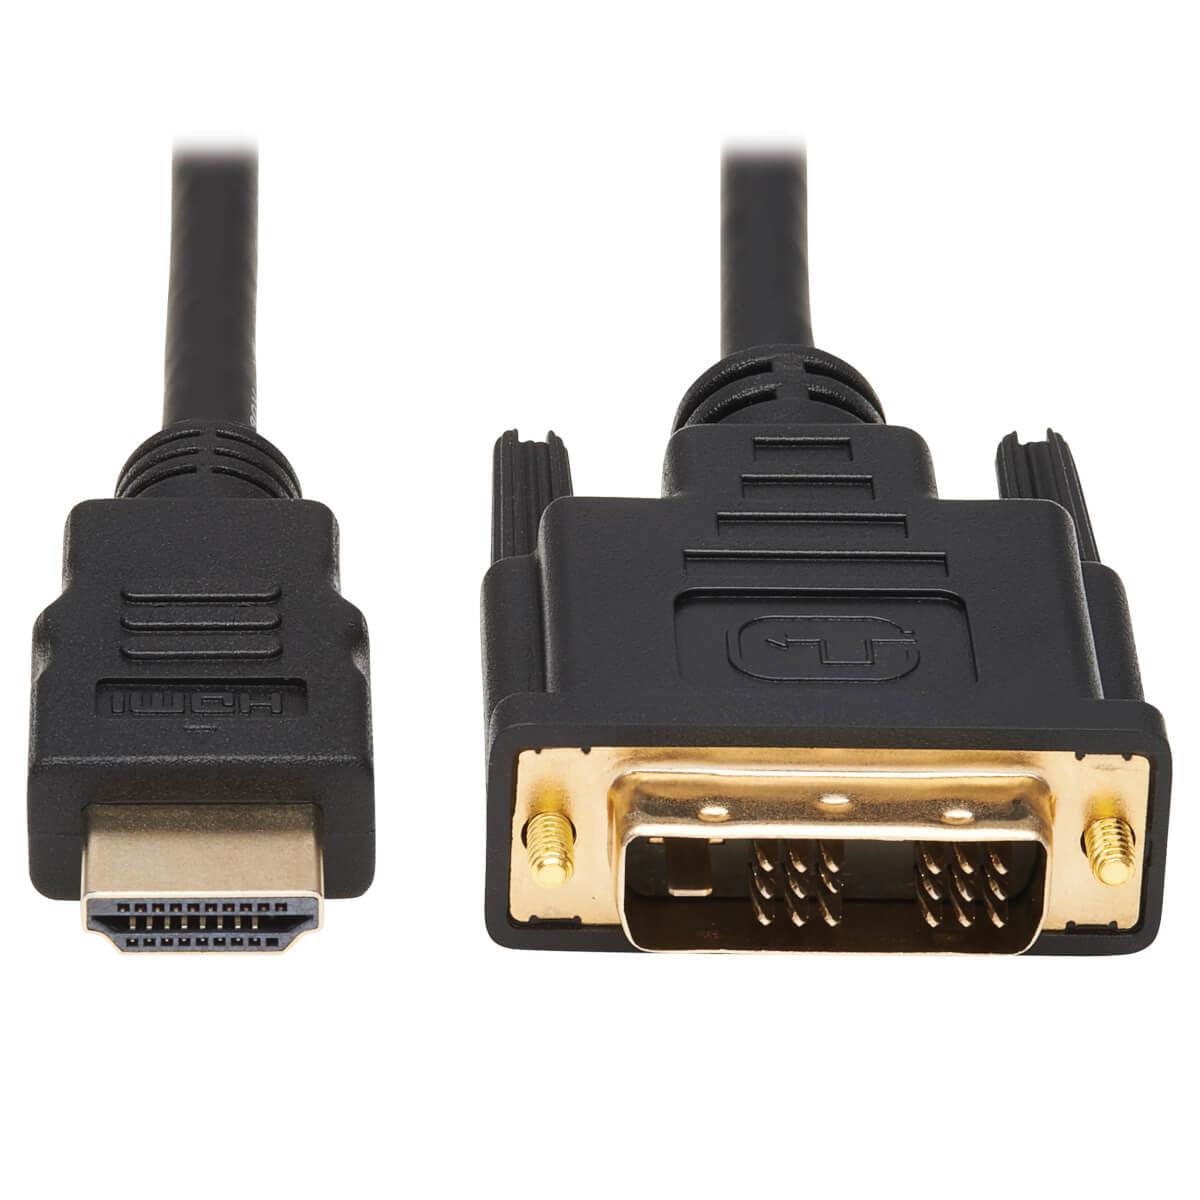 Tripp Lite P566-006 Hdmi To Dvi Adapter Cable (Hdmi To Dvi-D M/M), 6 Ft. (1.8 M)